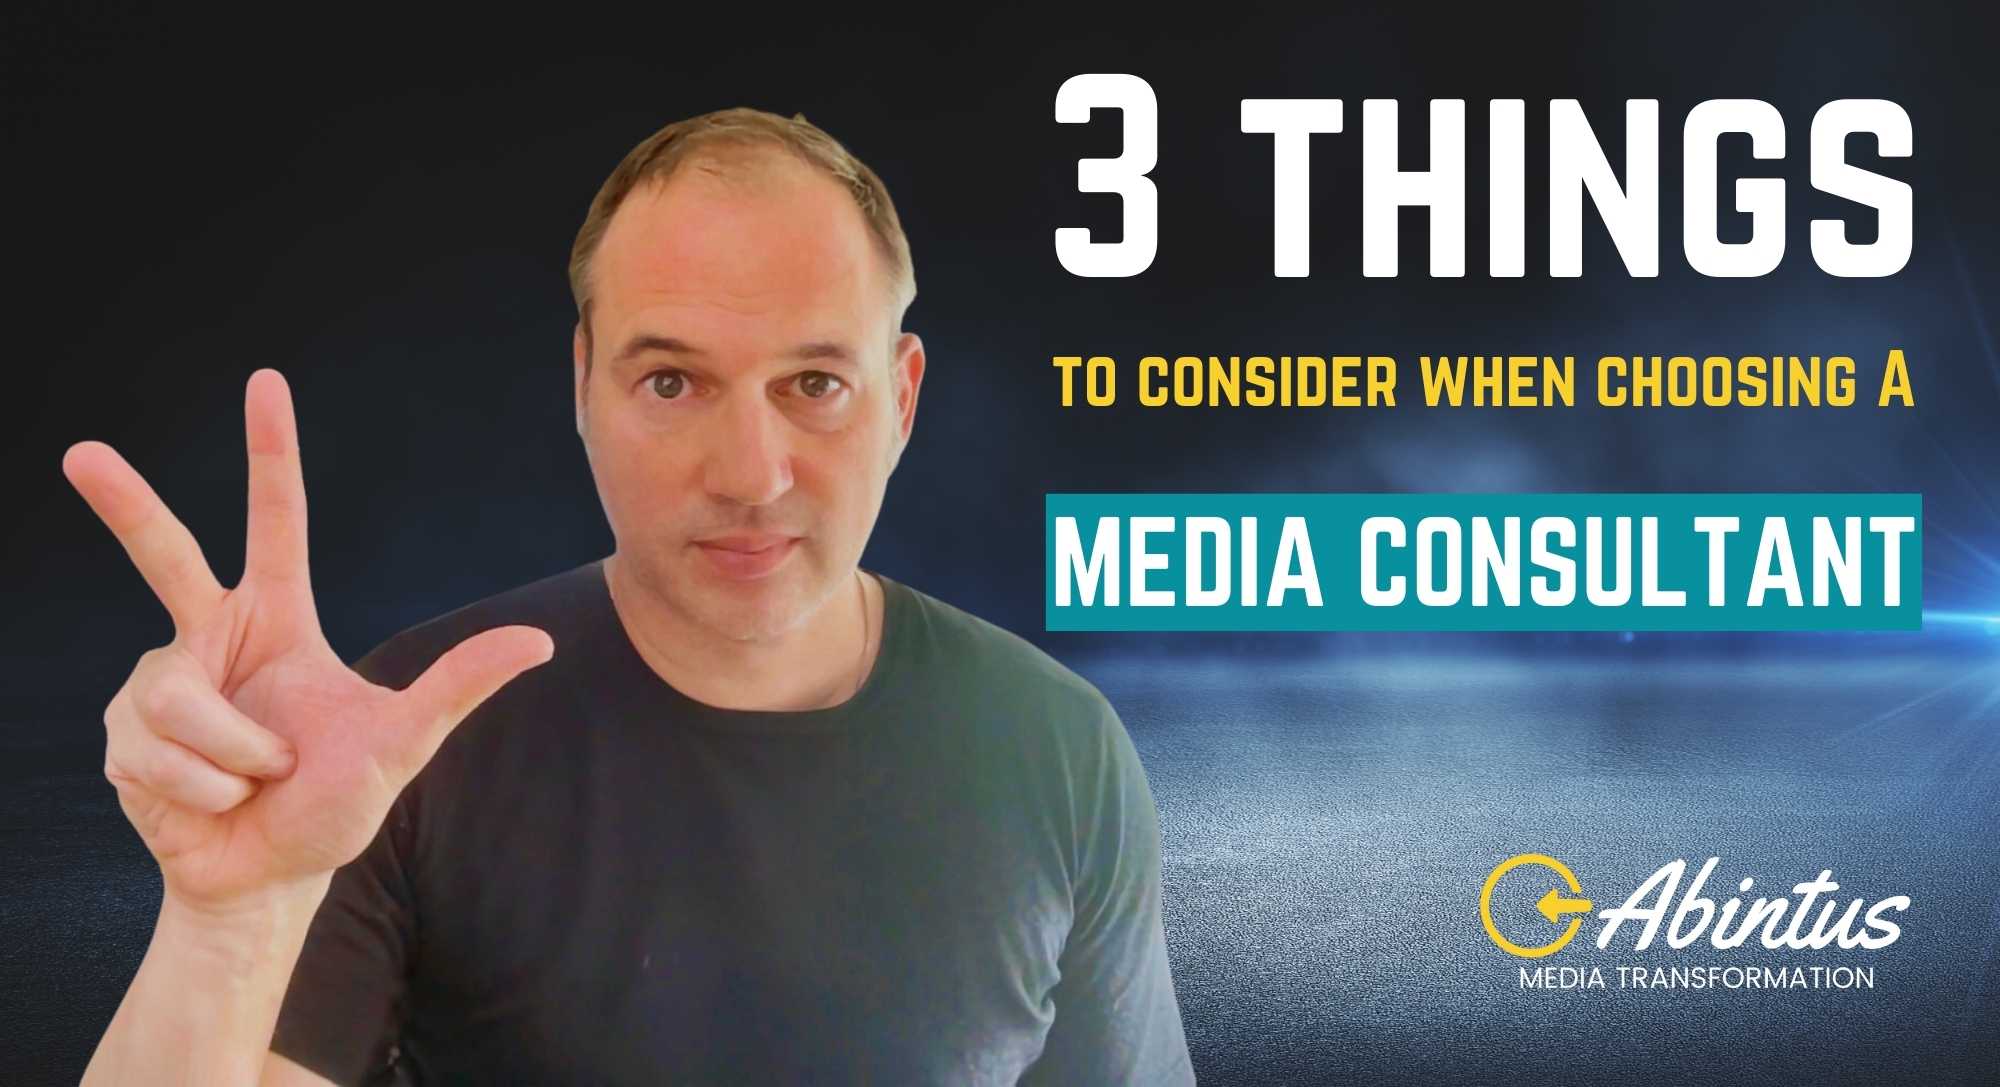 3 Things to Consider When Choosing a Media Consultant